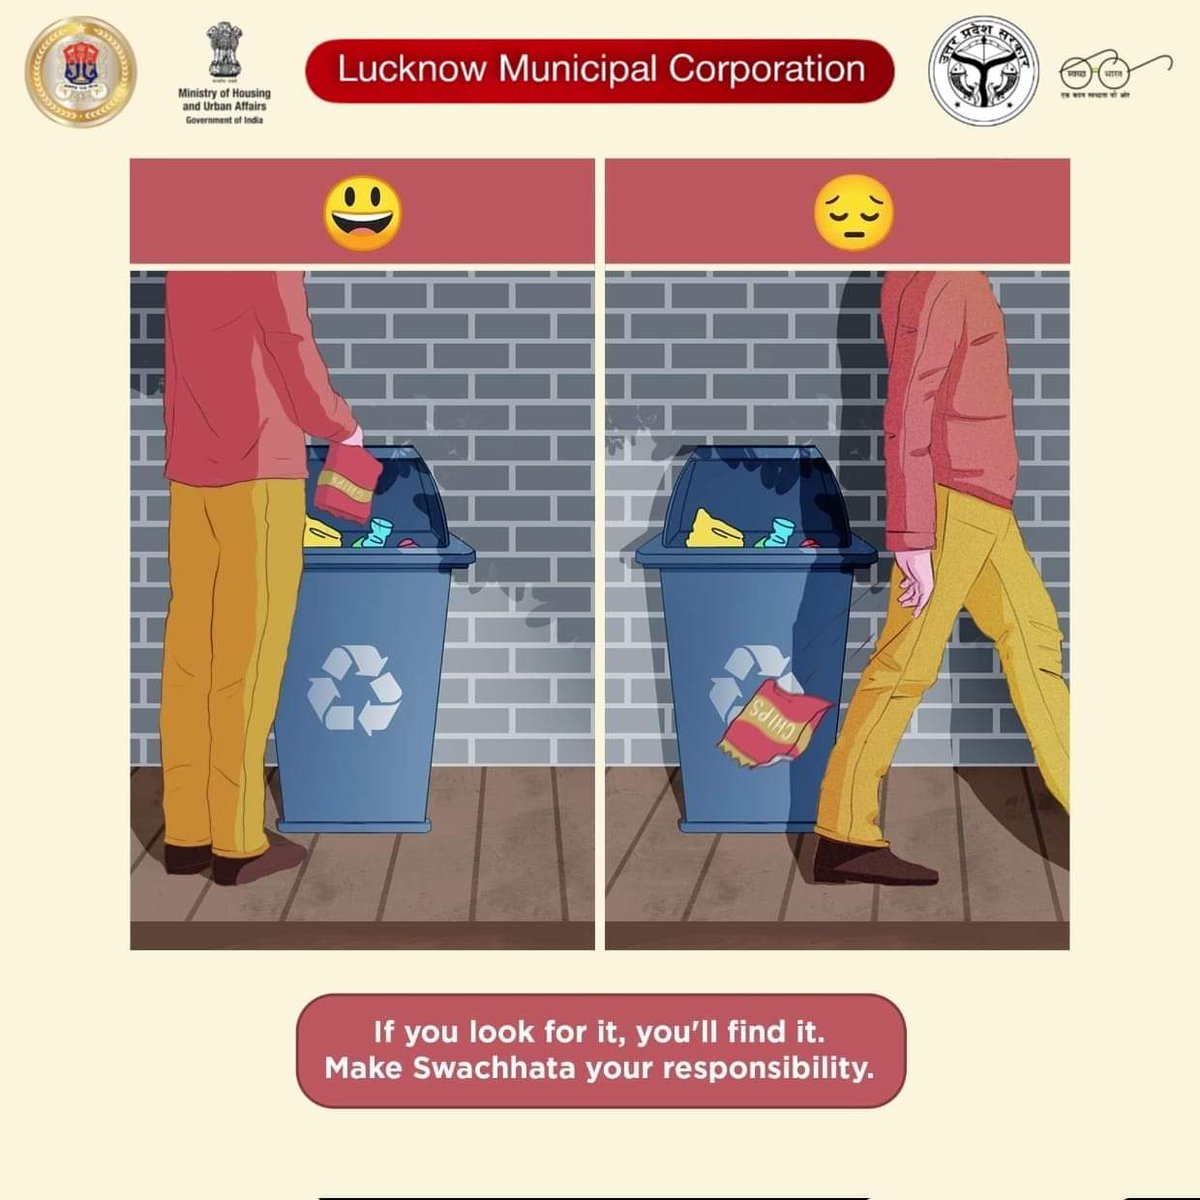 A well-maintained waste management cycle starts with individuals taking responsibility. Put garbage in the dustbin for a cleaner Lucknow.

#CleanCityLucknow
#स्वच्छता_परमोधर्म 
#WasteSegregation 
@SBM_UP 
@NagarVikas_UP 
@SwachhBharatGov 
@CMOfficeUP 
@HardeepSPuri 
@ChiefSecyUP